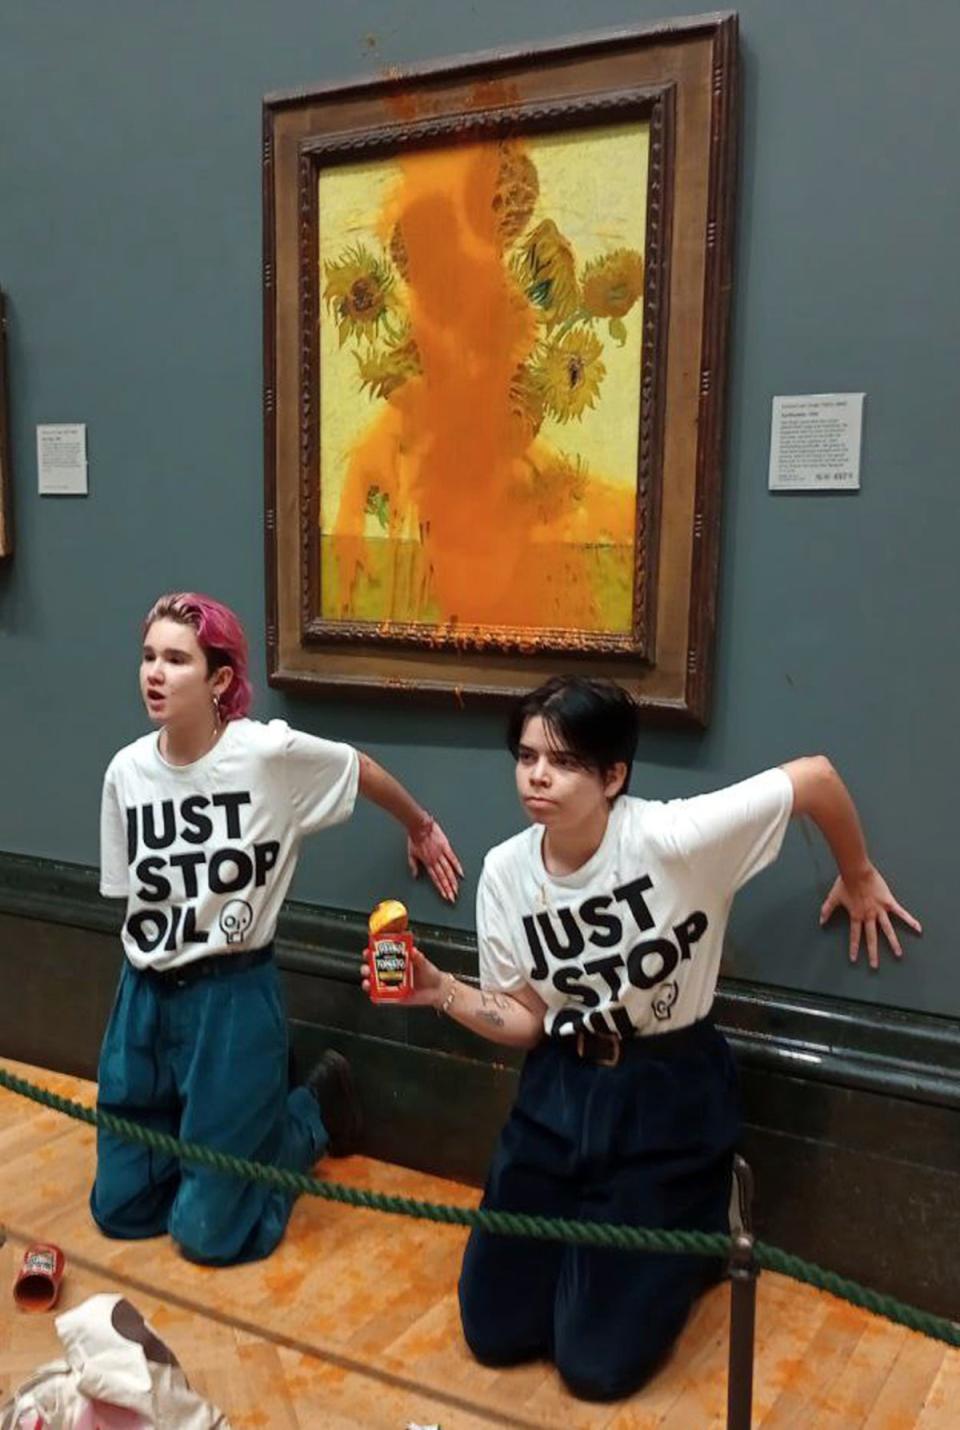 Two protesters who have thrown tinned soup at Vincent Van Gogh’s famous 1888 work Sunflowers at the National Gallery in London, Friday Oct. 14, 2022. (AP)